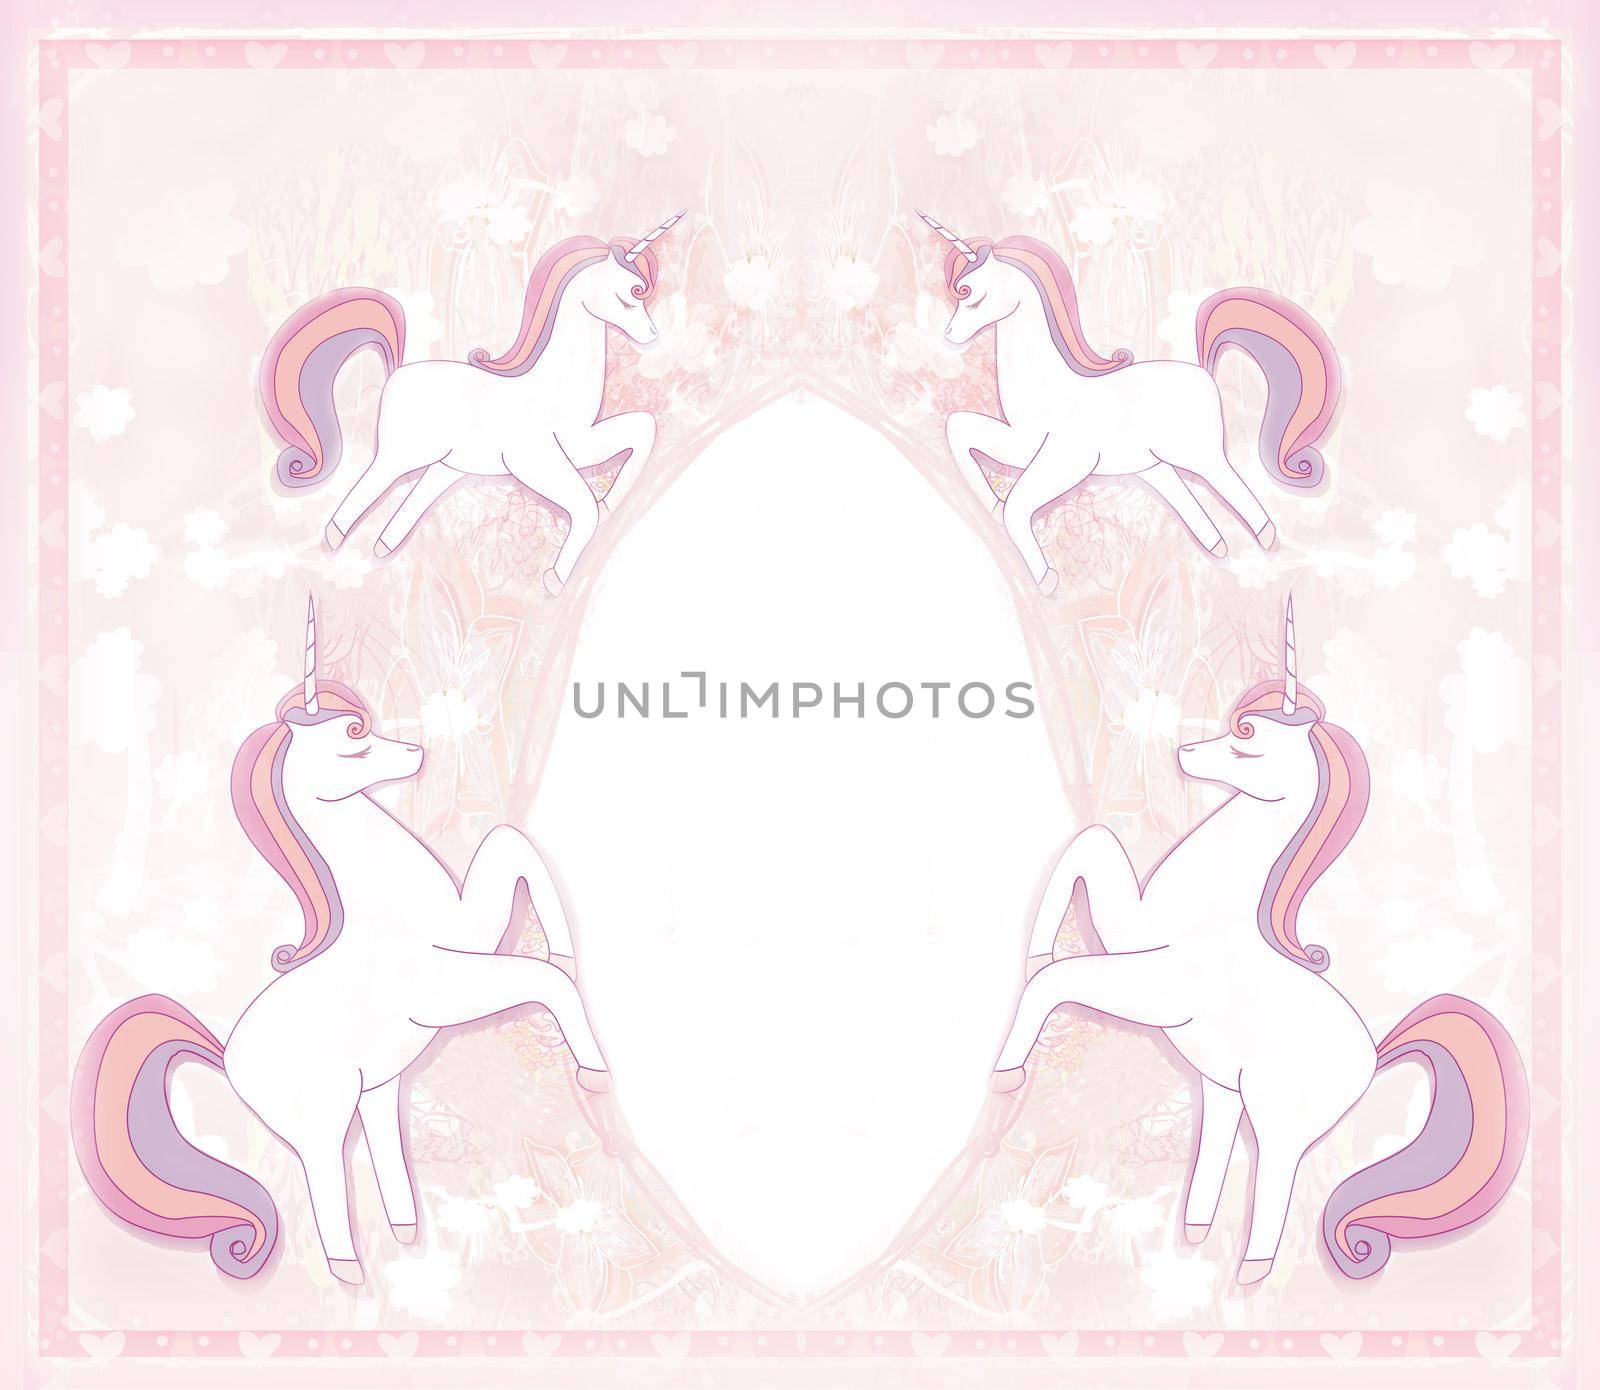 decorative frame with cute unicorns on a beautiful artistic pink floral background by JackyBrown